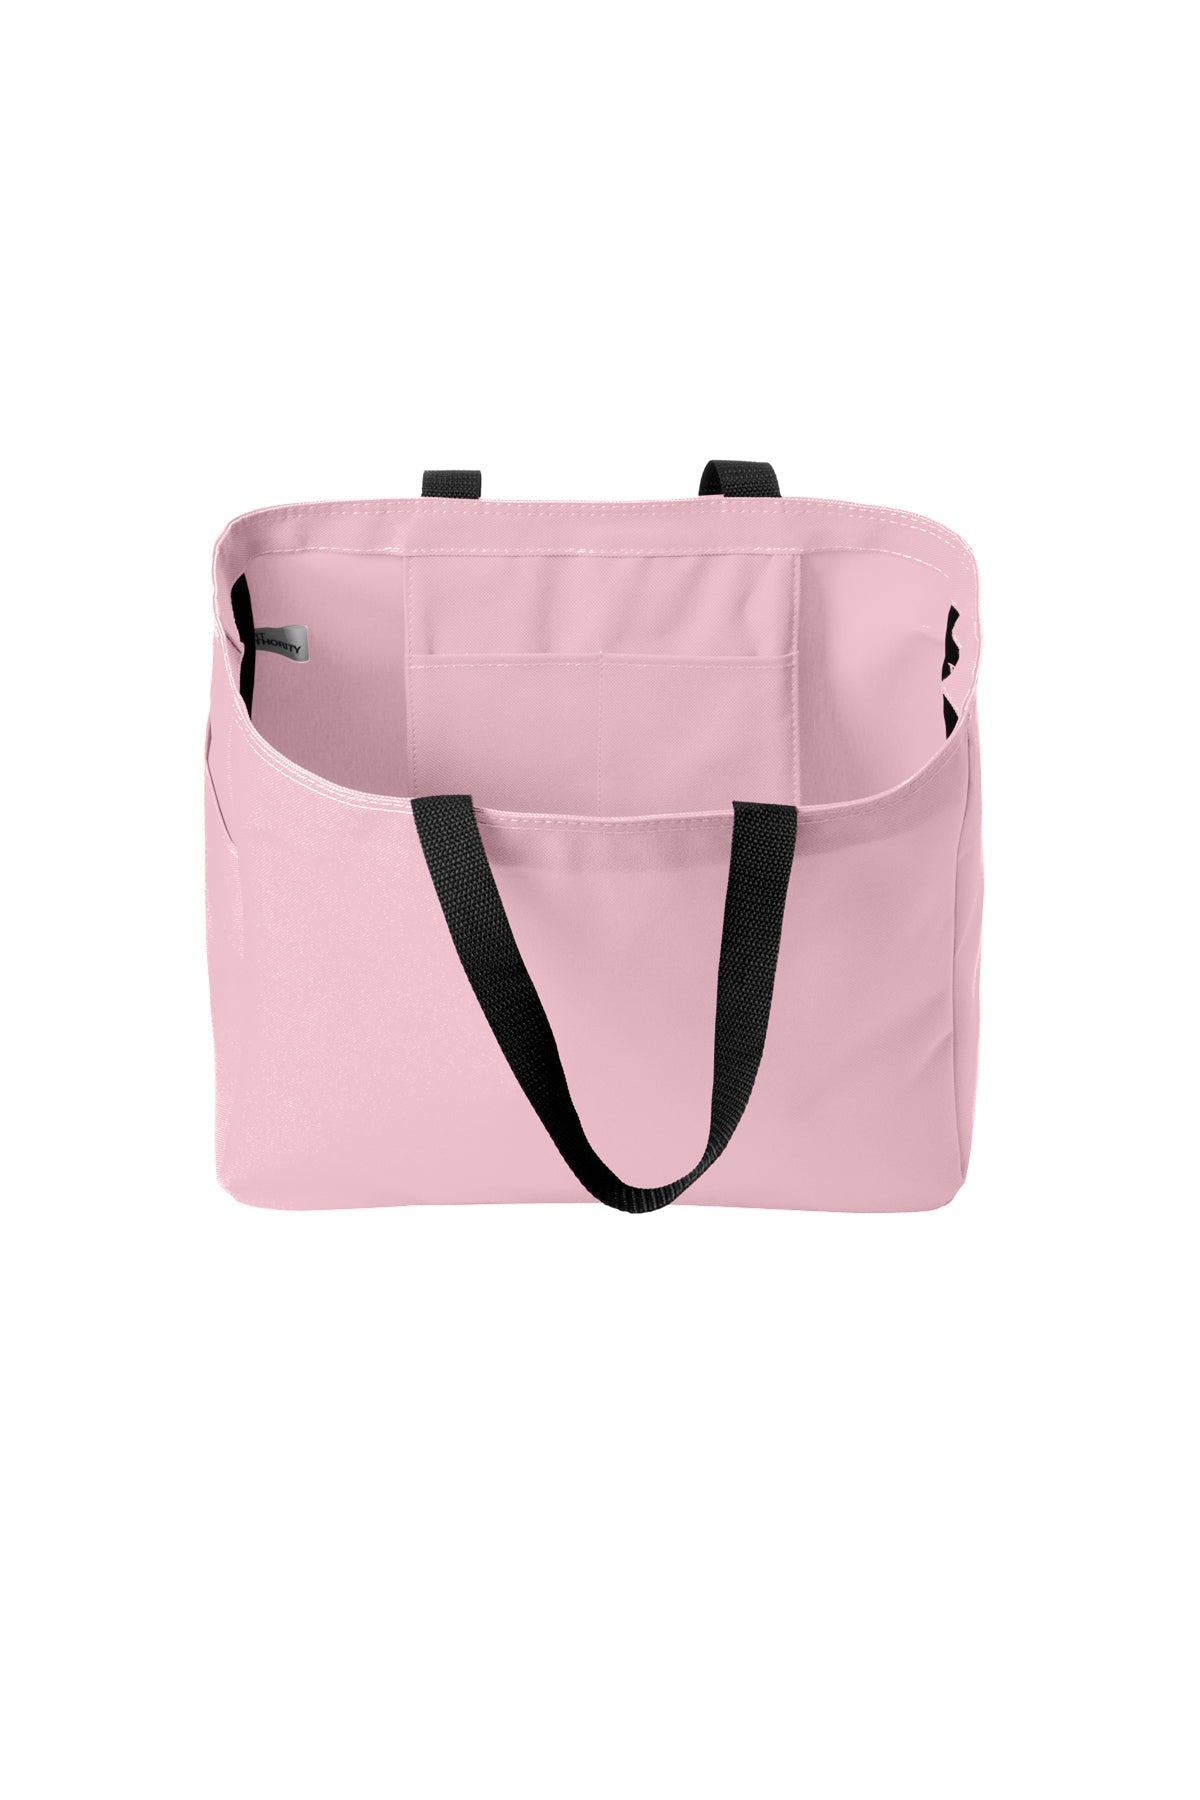 Port Authority - Essential Customized Tote, Pink